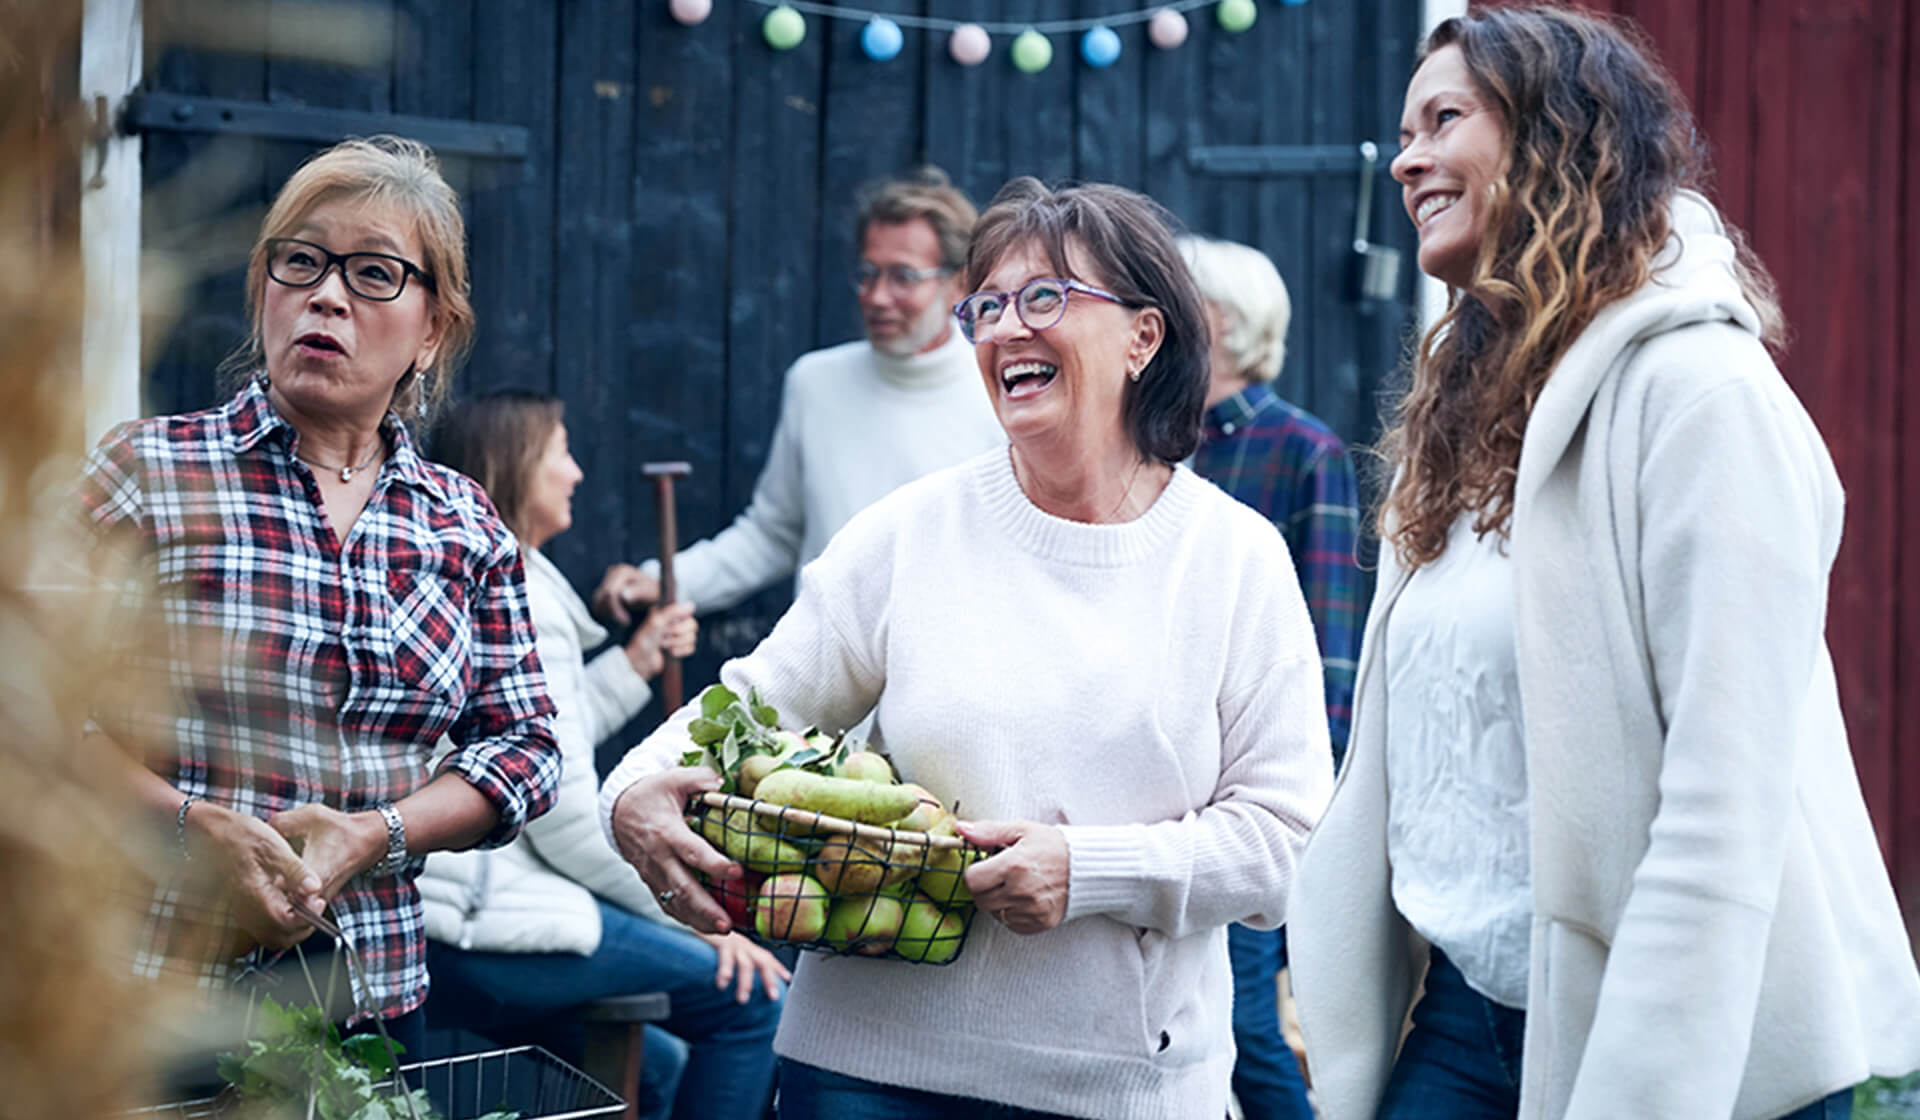 Cheerful women holding baskets of fresh produce among friends 